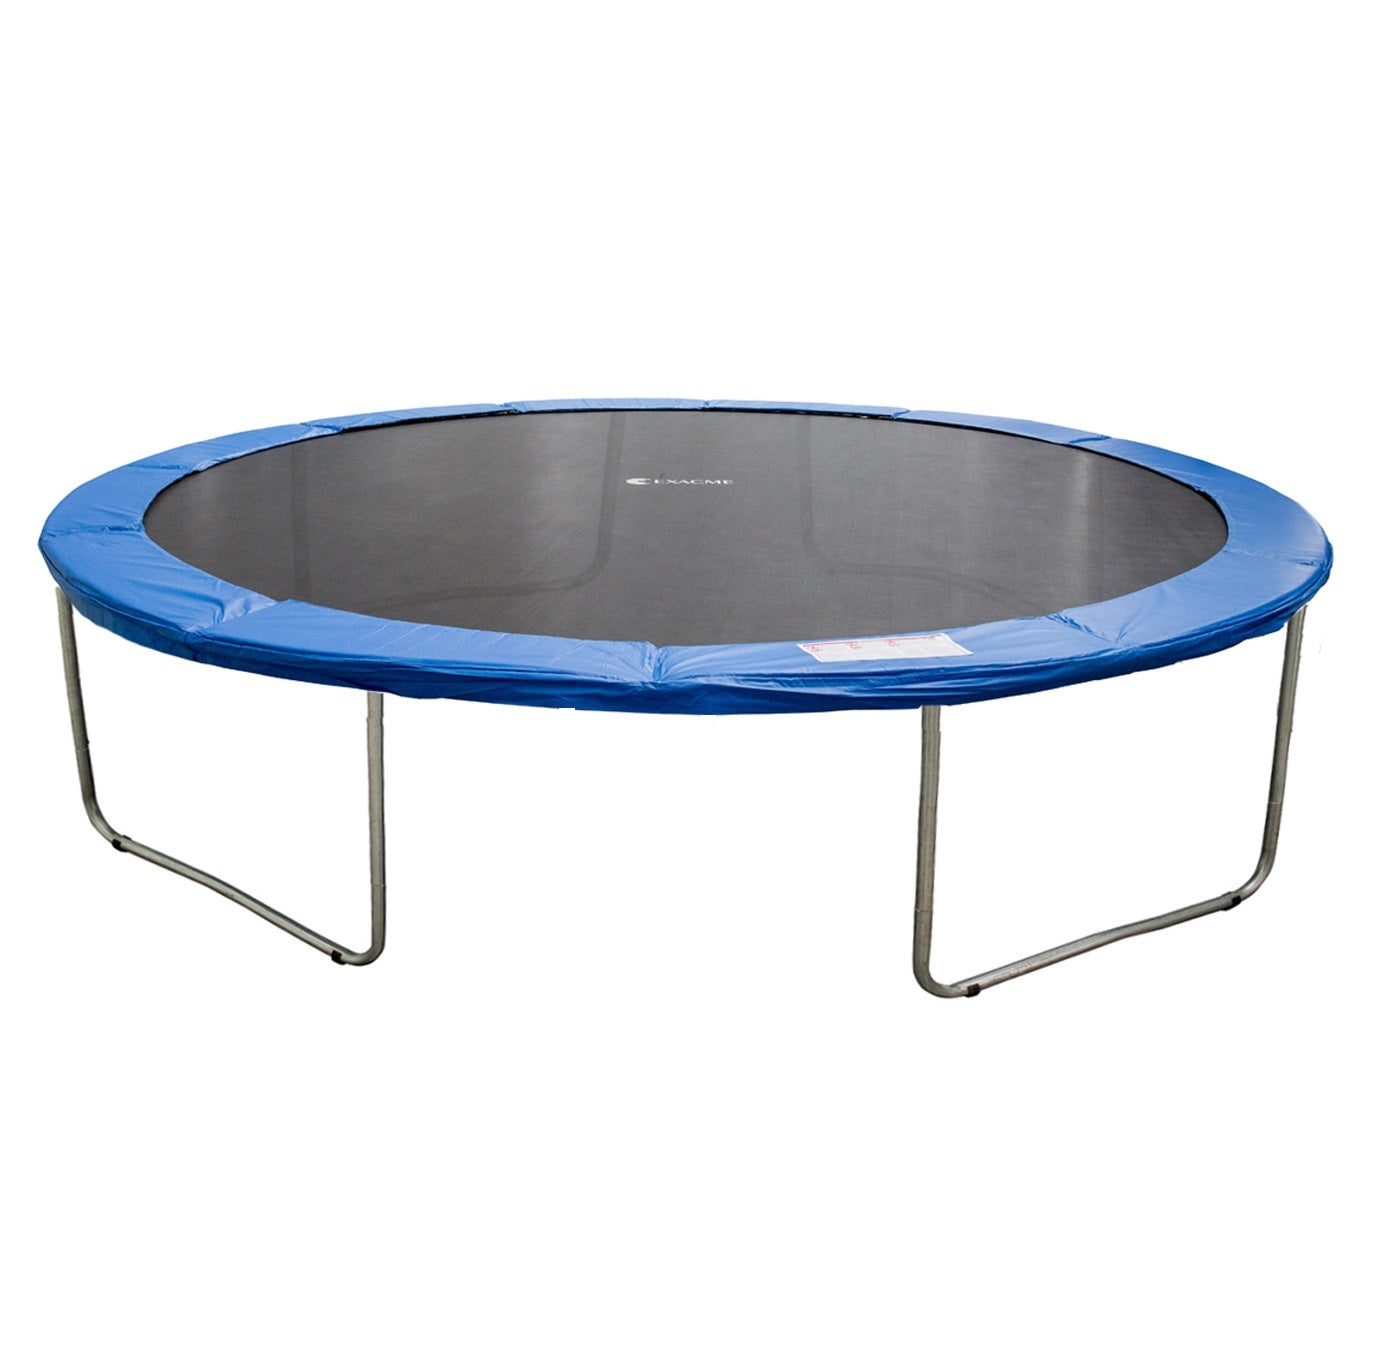 ExacMe Outdoor Trampoline No Net, Trampoline without Enclosure 16 15 1